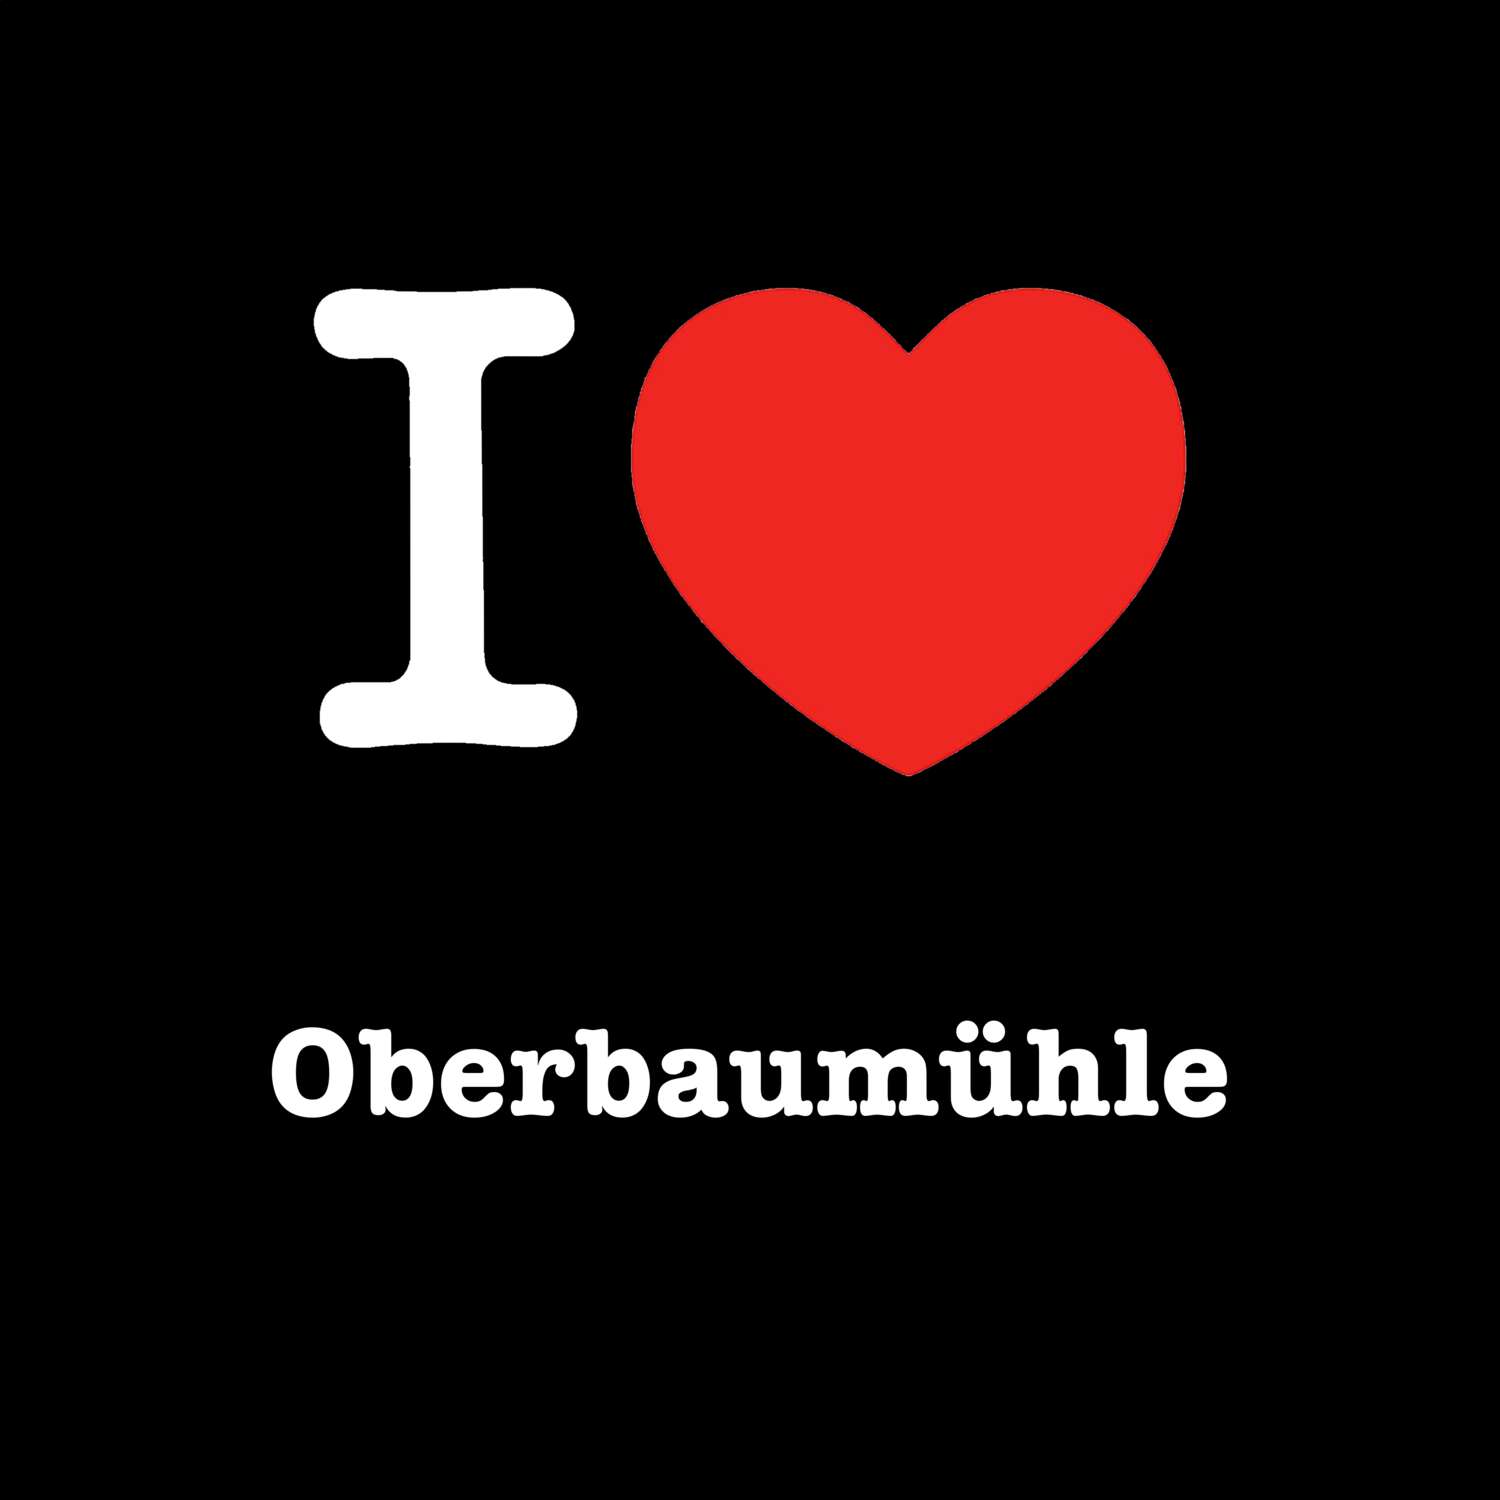 Oberbaumühle T-Shirt »I love«